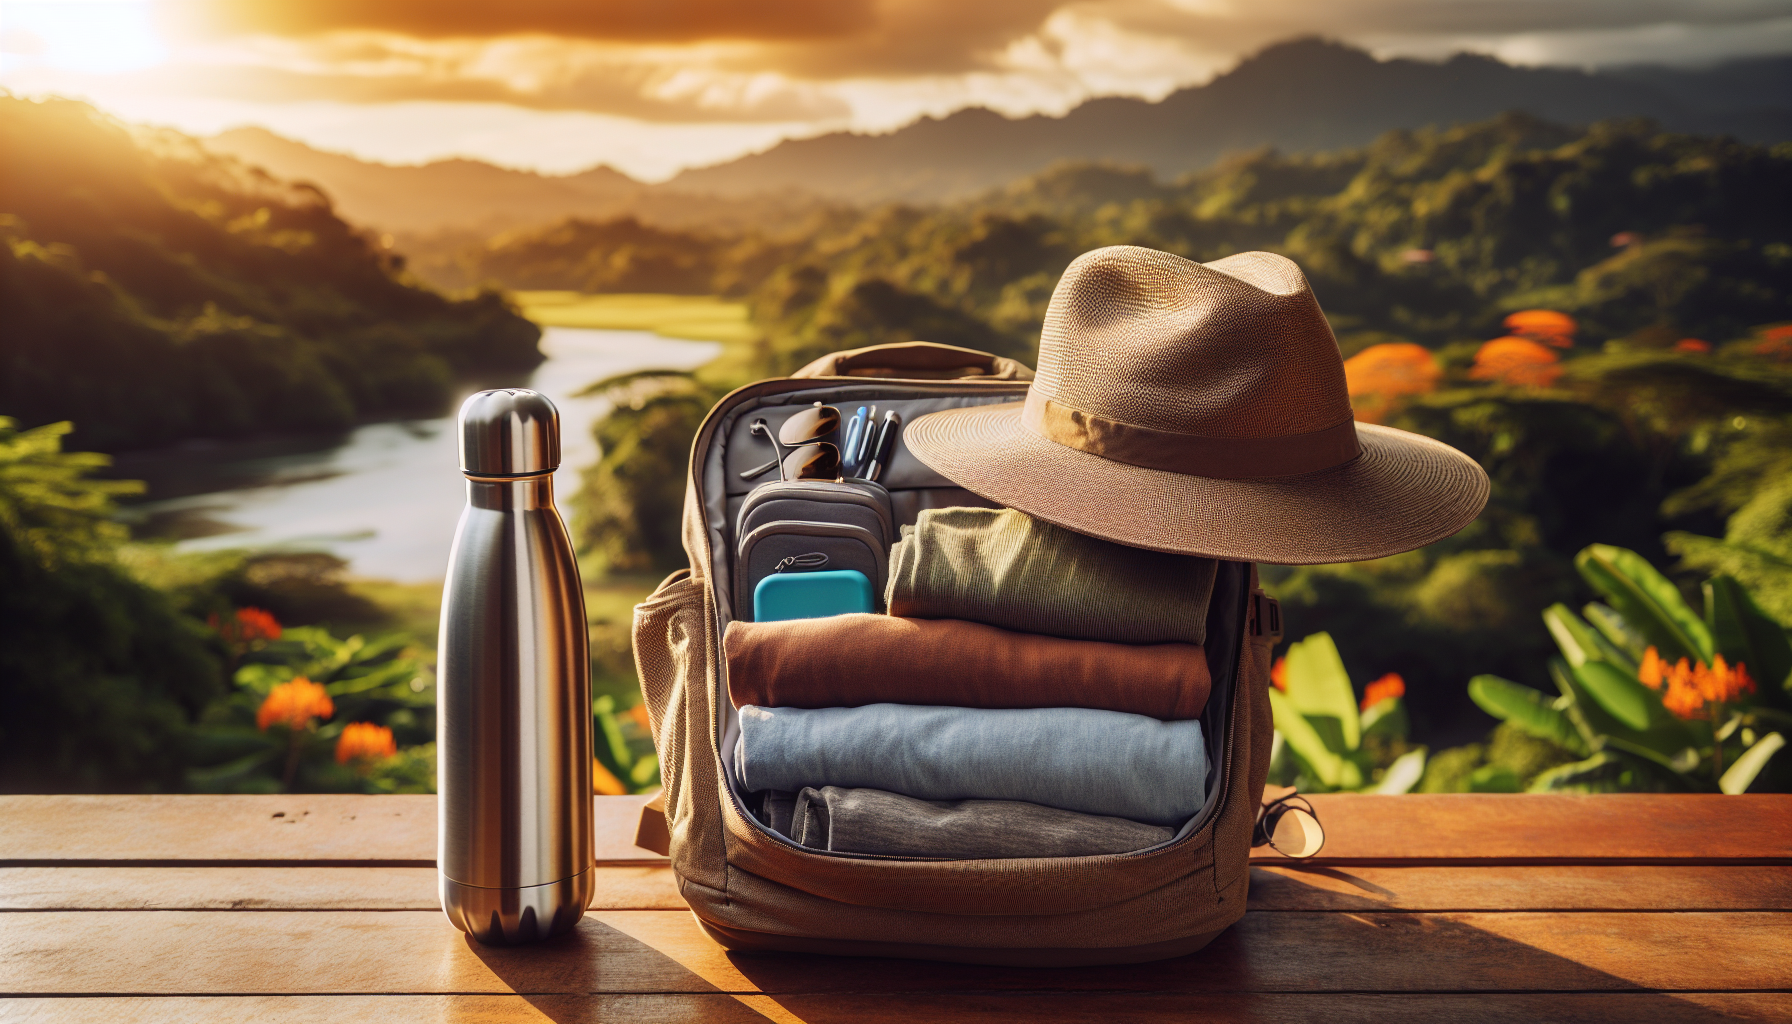 Packing essentials for Costa Rica's dry season